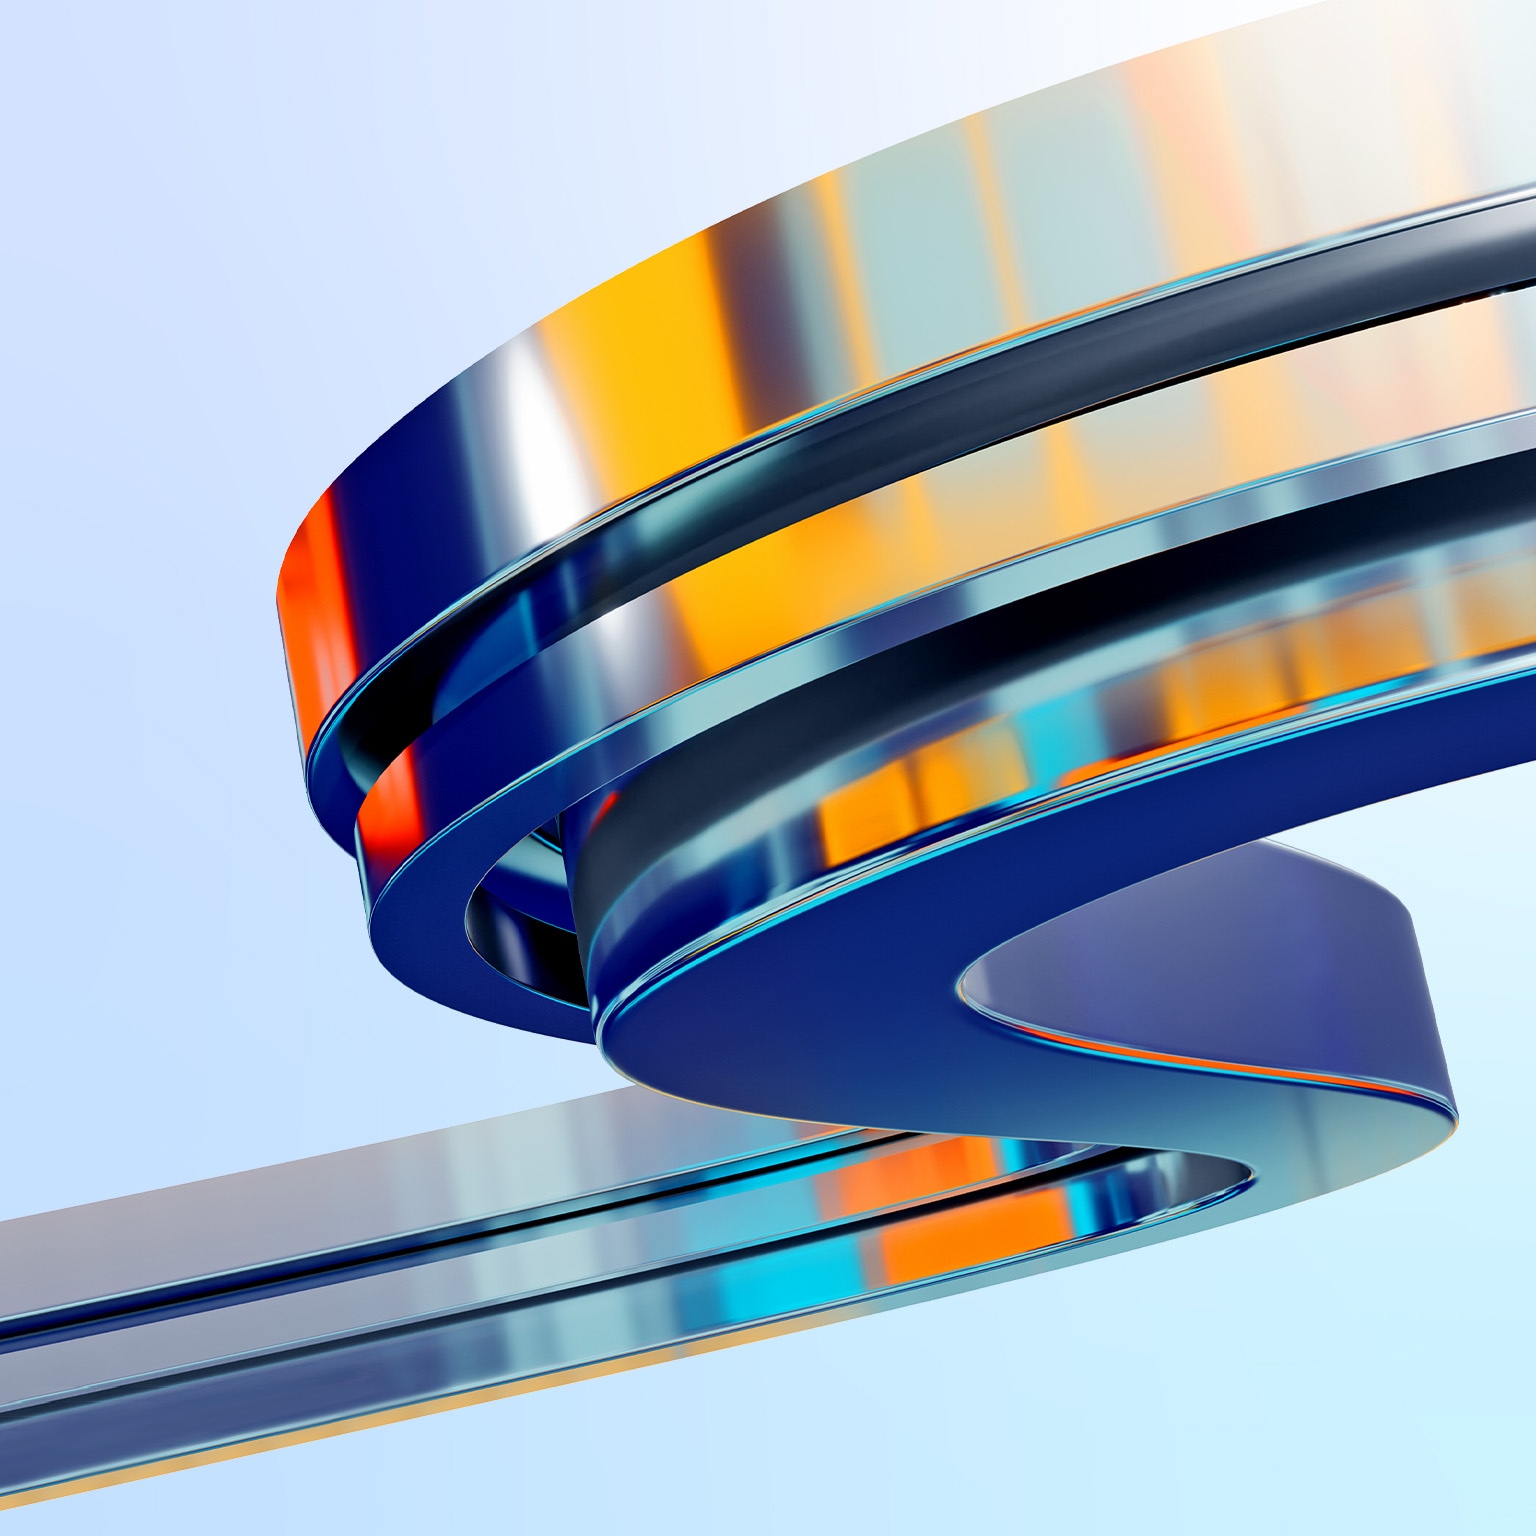 Image of a shiny metallic alloy 3D s-curve with orange, blue and purple reflections.